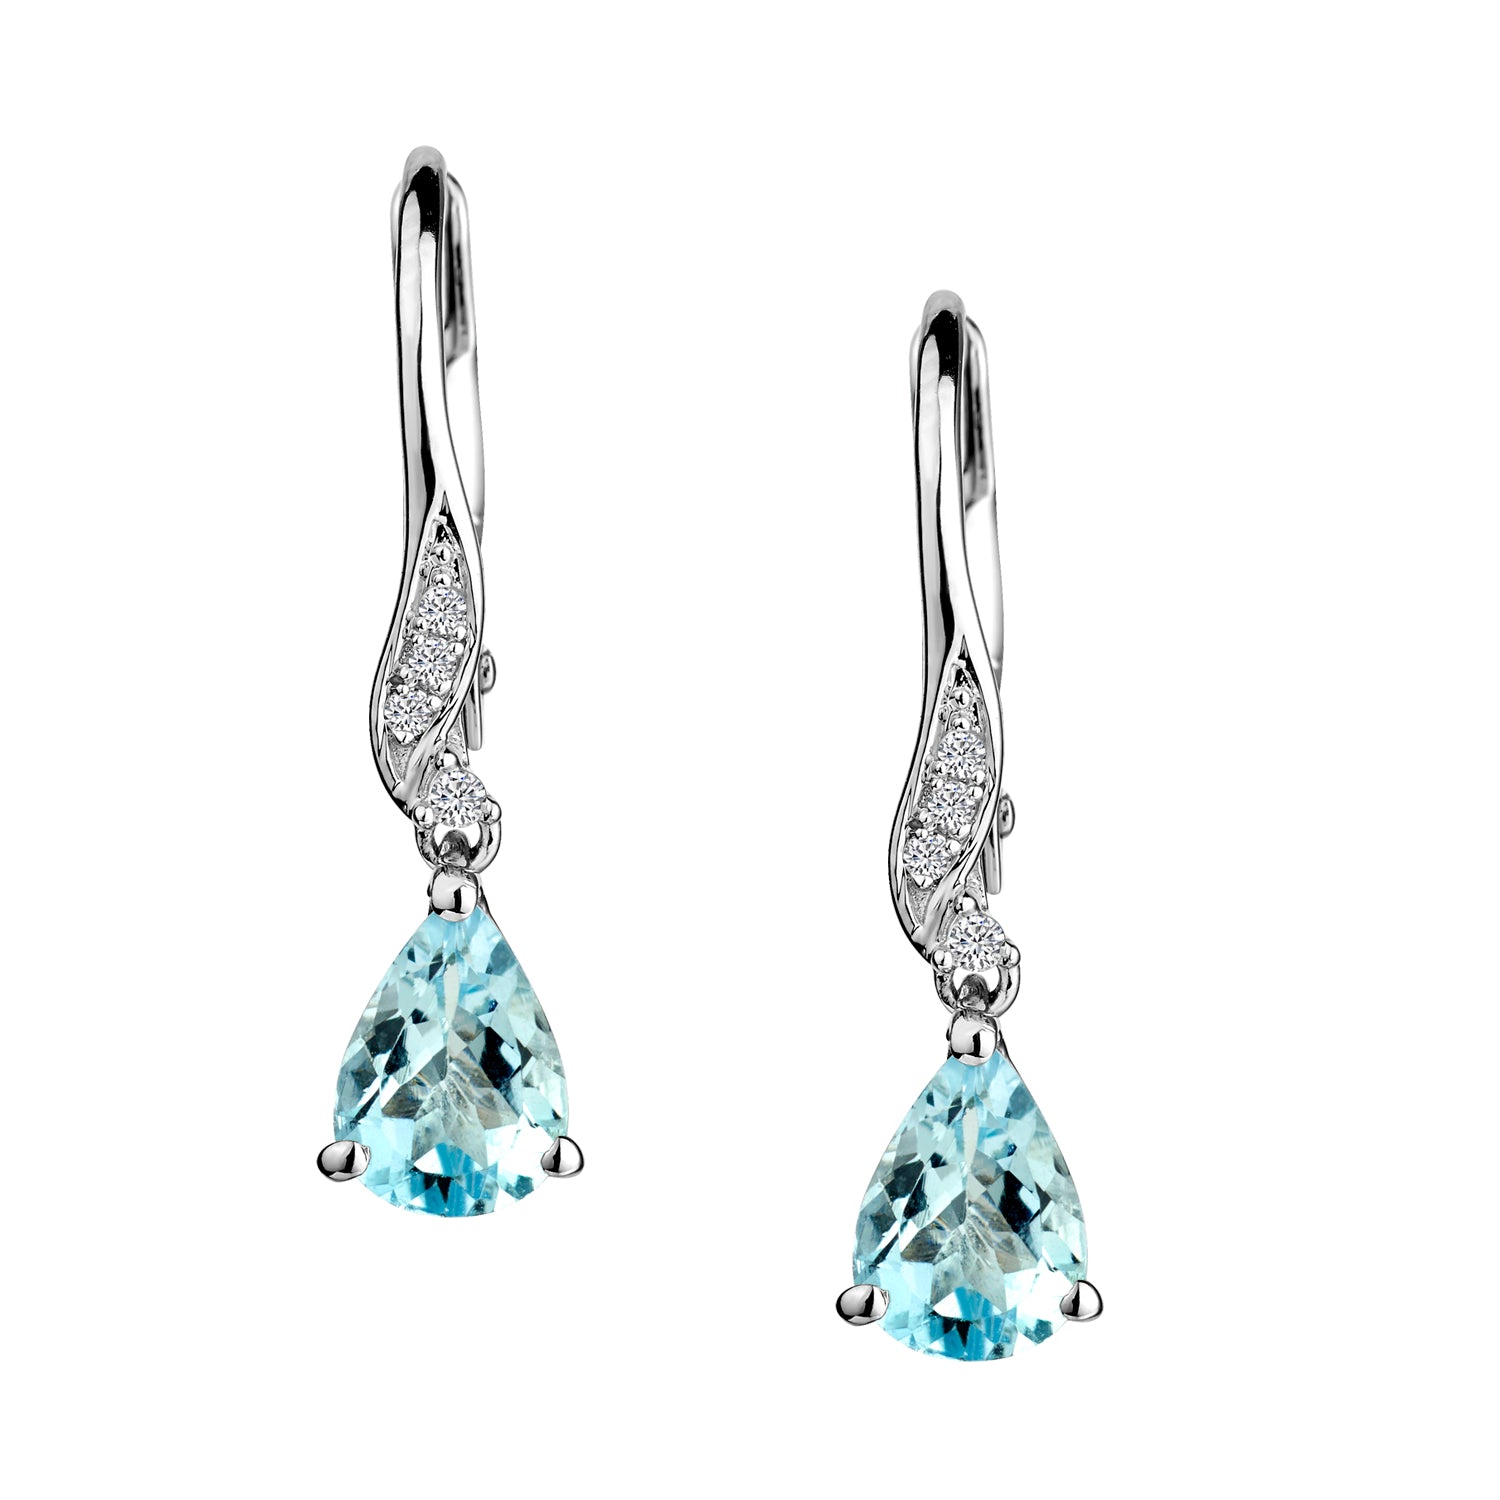 Genuine Aquamarine And White Sapphire Drop Earrings, Silver.....................NOW